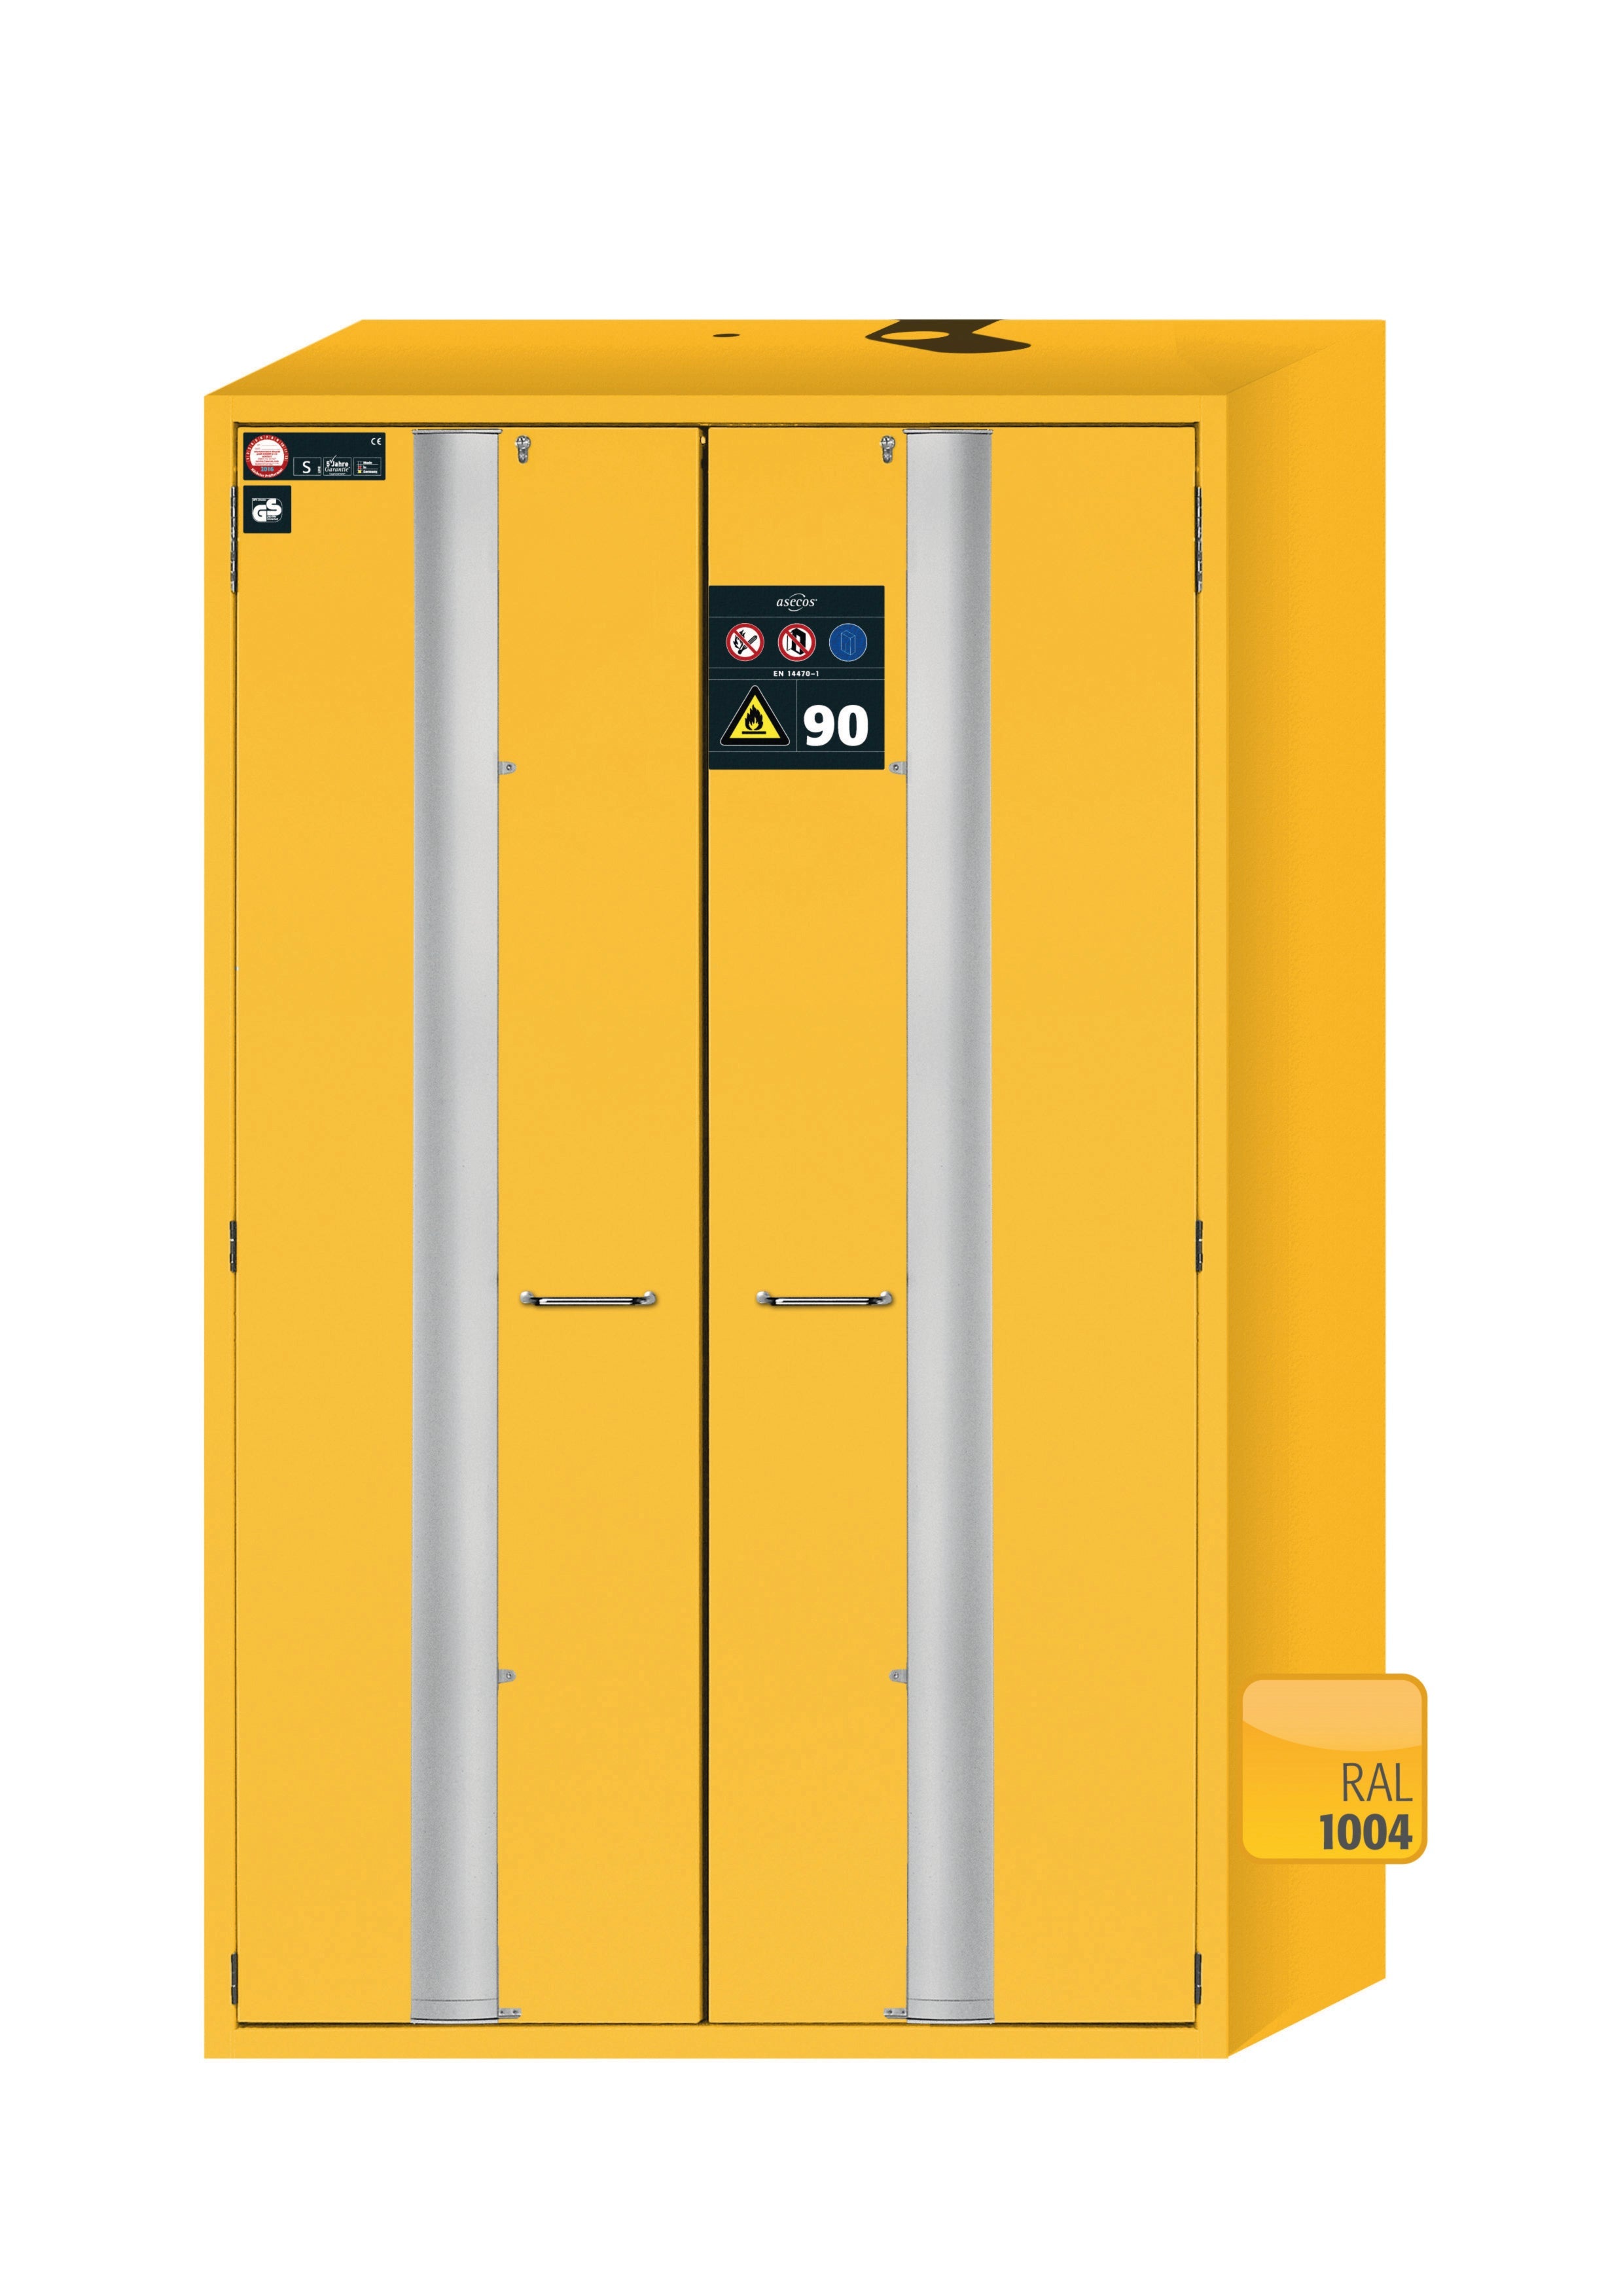 Type 90 safety storage cabinet S-PHOENIX-90 model S90.196.120.FDAS in warning yellow RAL 1004 with 2x tray shelf (standard) (stainless steel 1.4016),